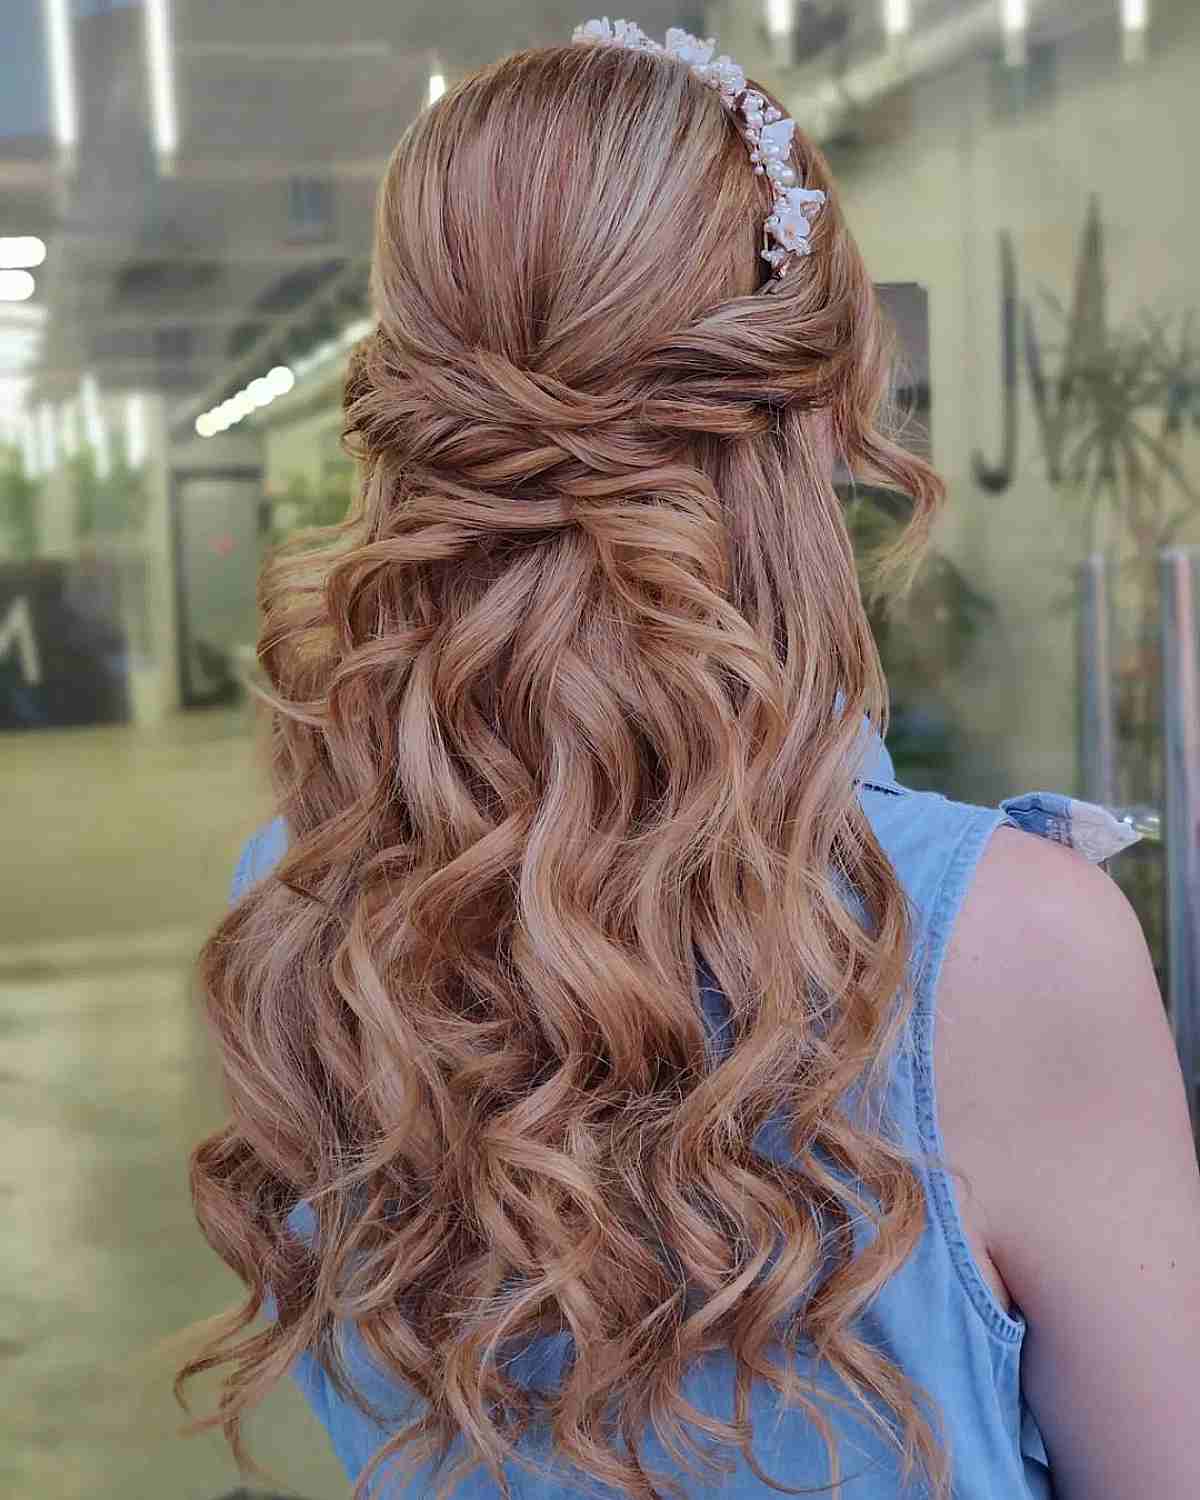 Perfect for a Bridesmaid with Long Hair